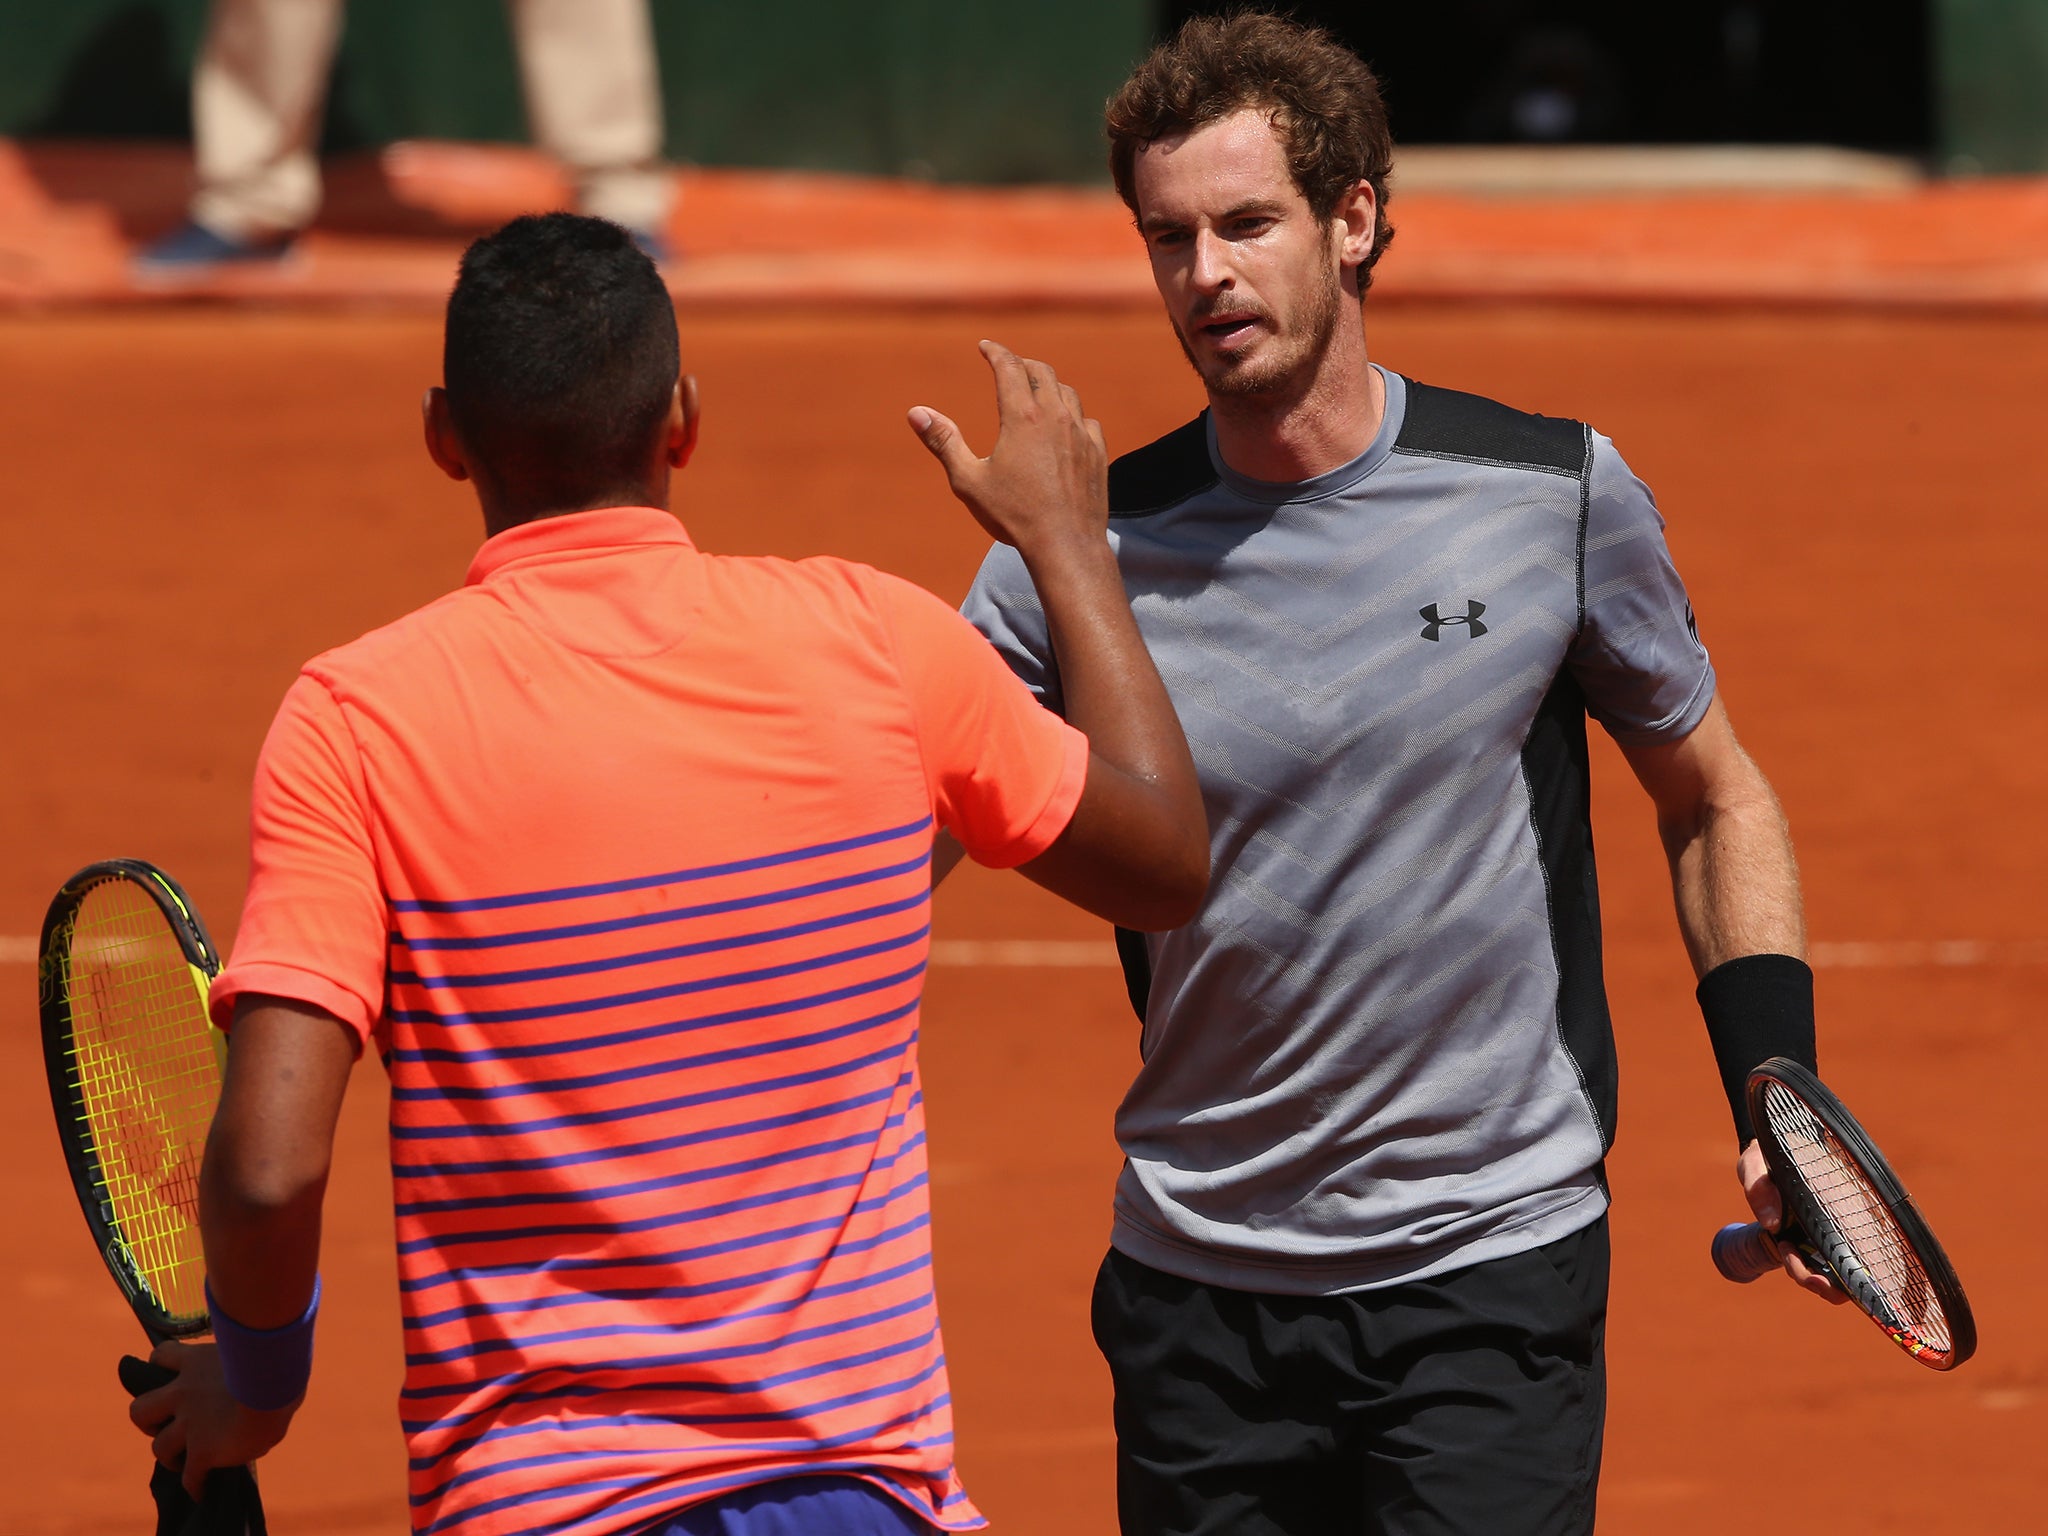 Murray shakes hands with Kyrgios after his victory